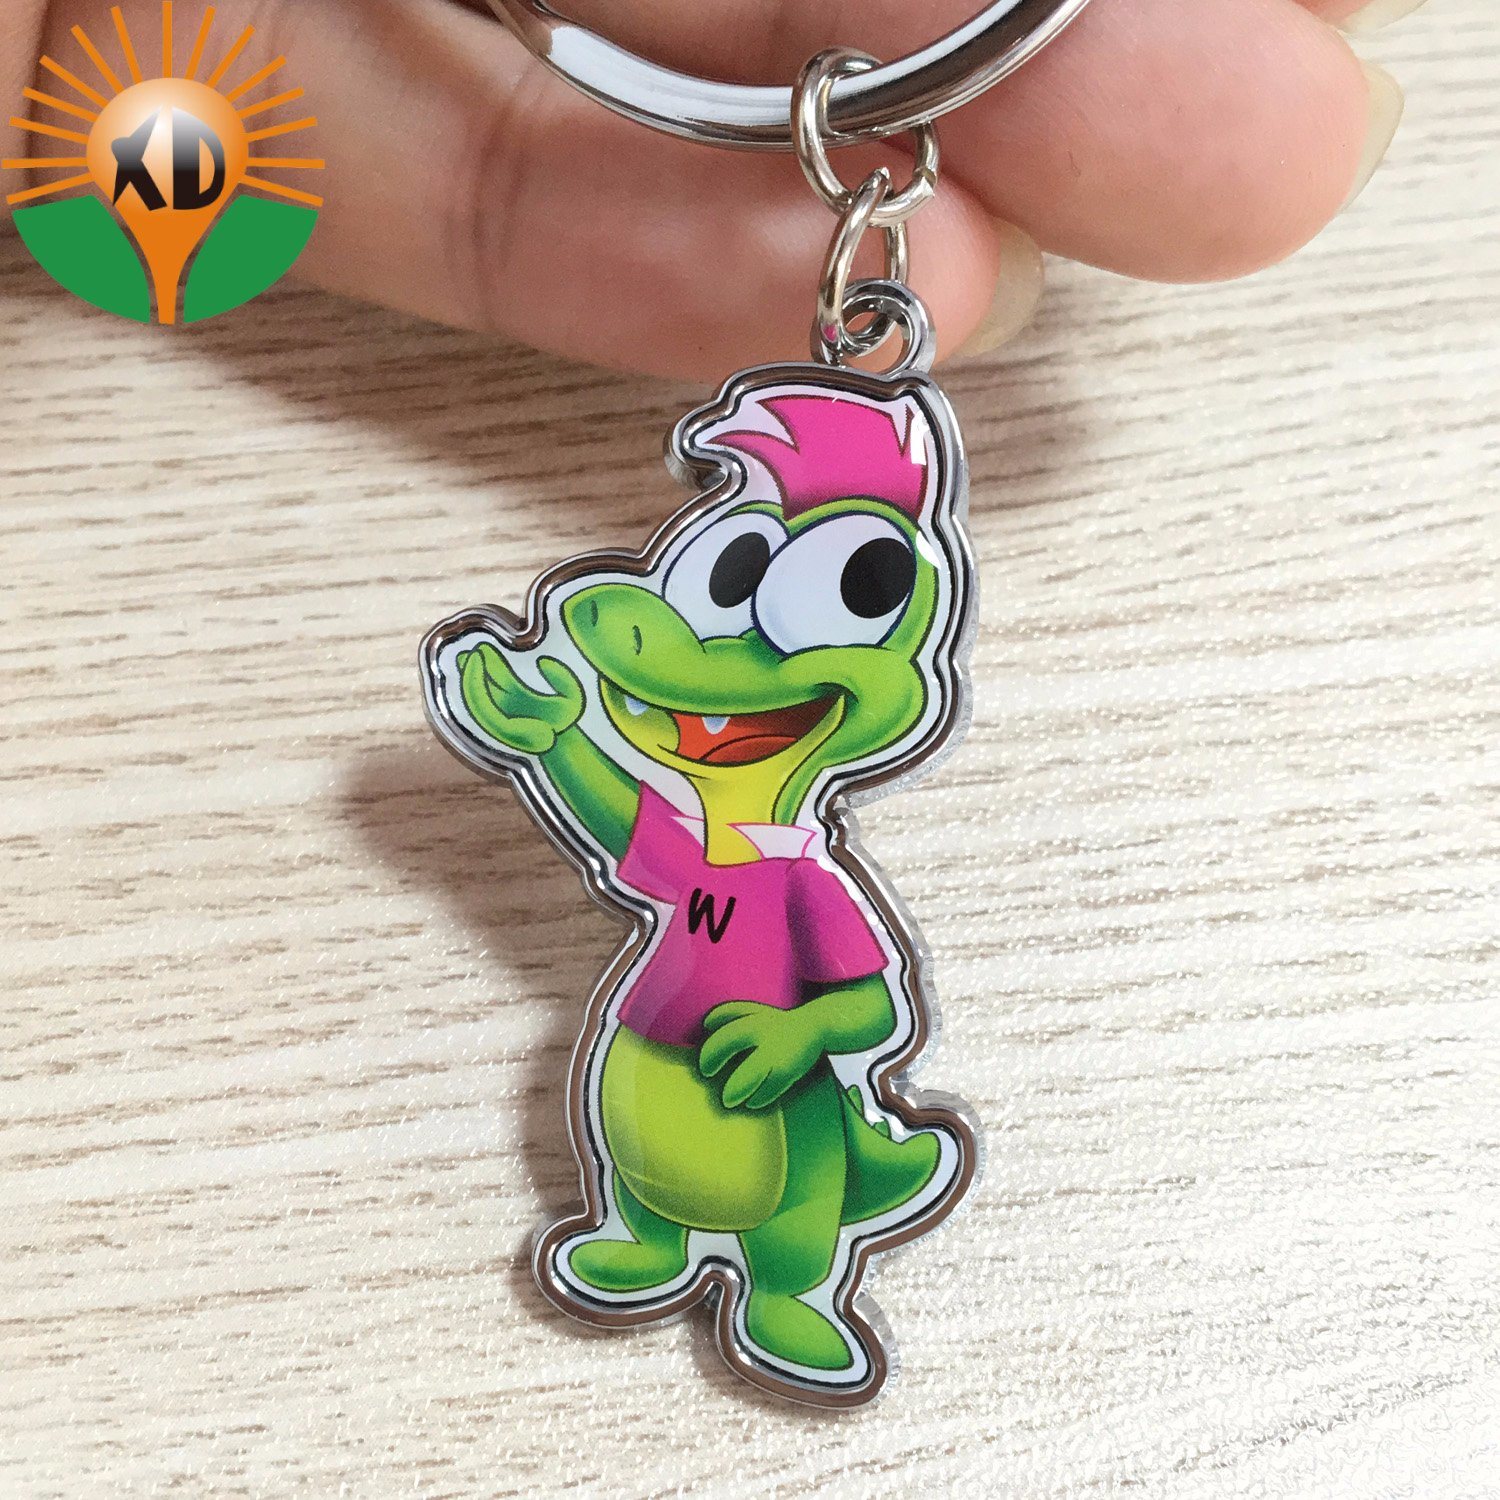 Wholesale Cheap Metal Customized Key Chain with Key Ring